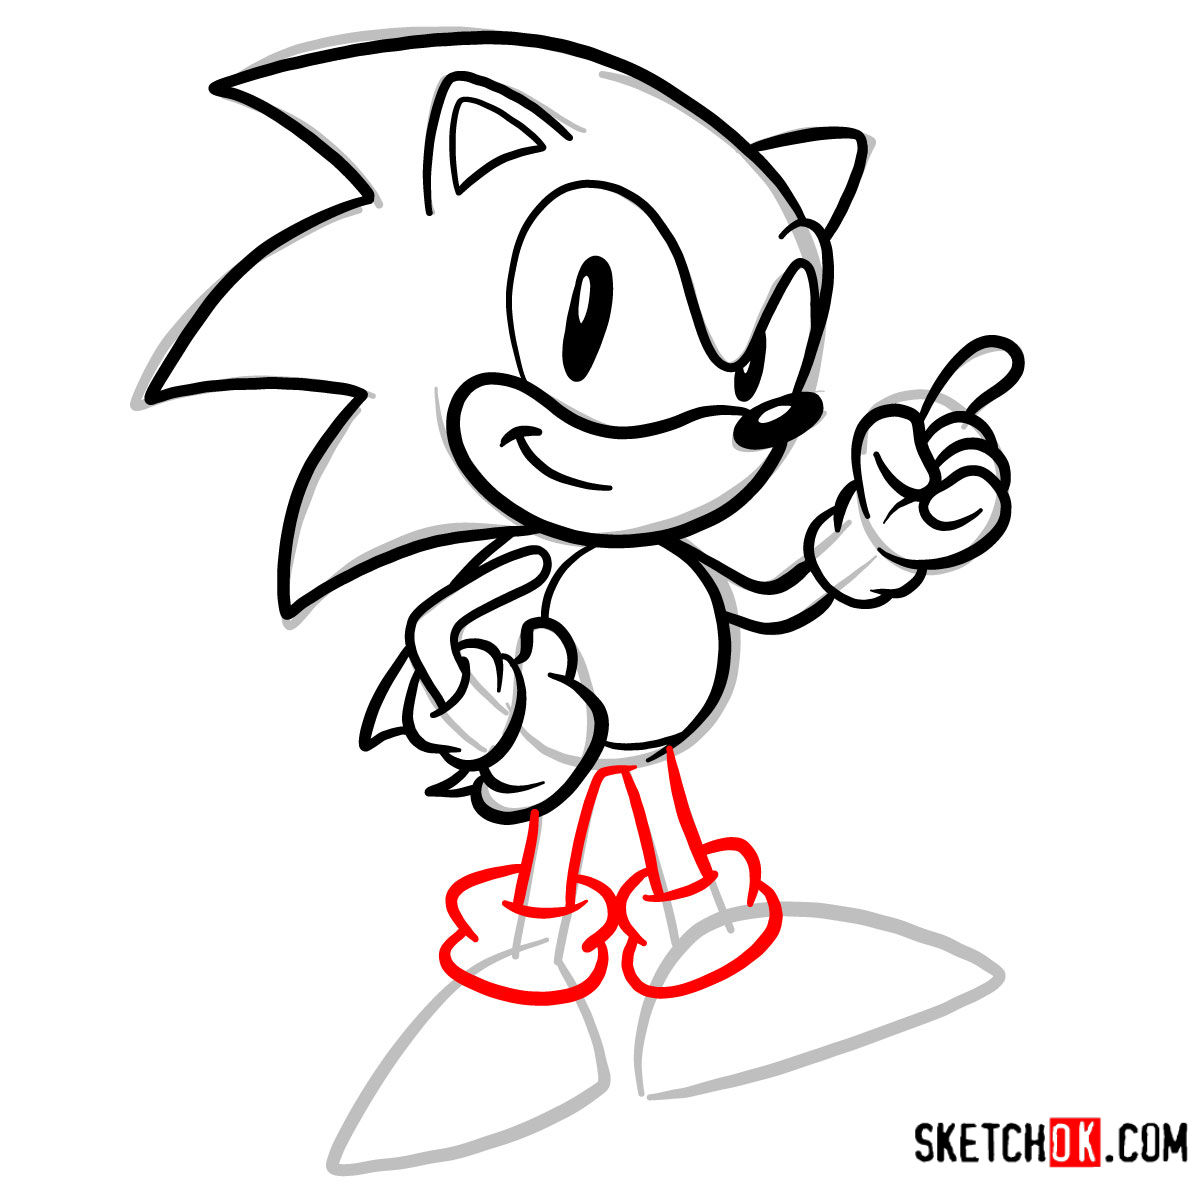 How to draw Sonic the Hedgehog SEGA games style - step 07